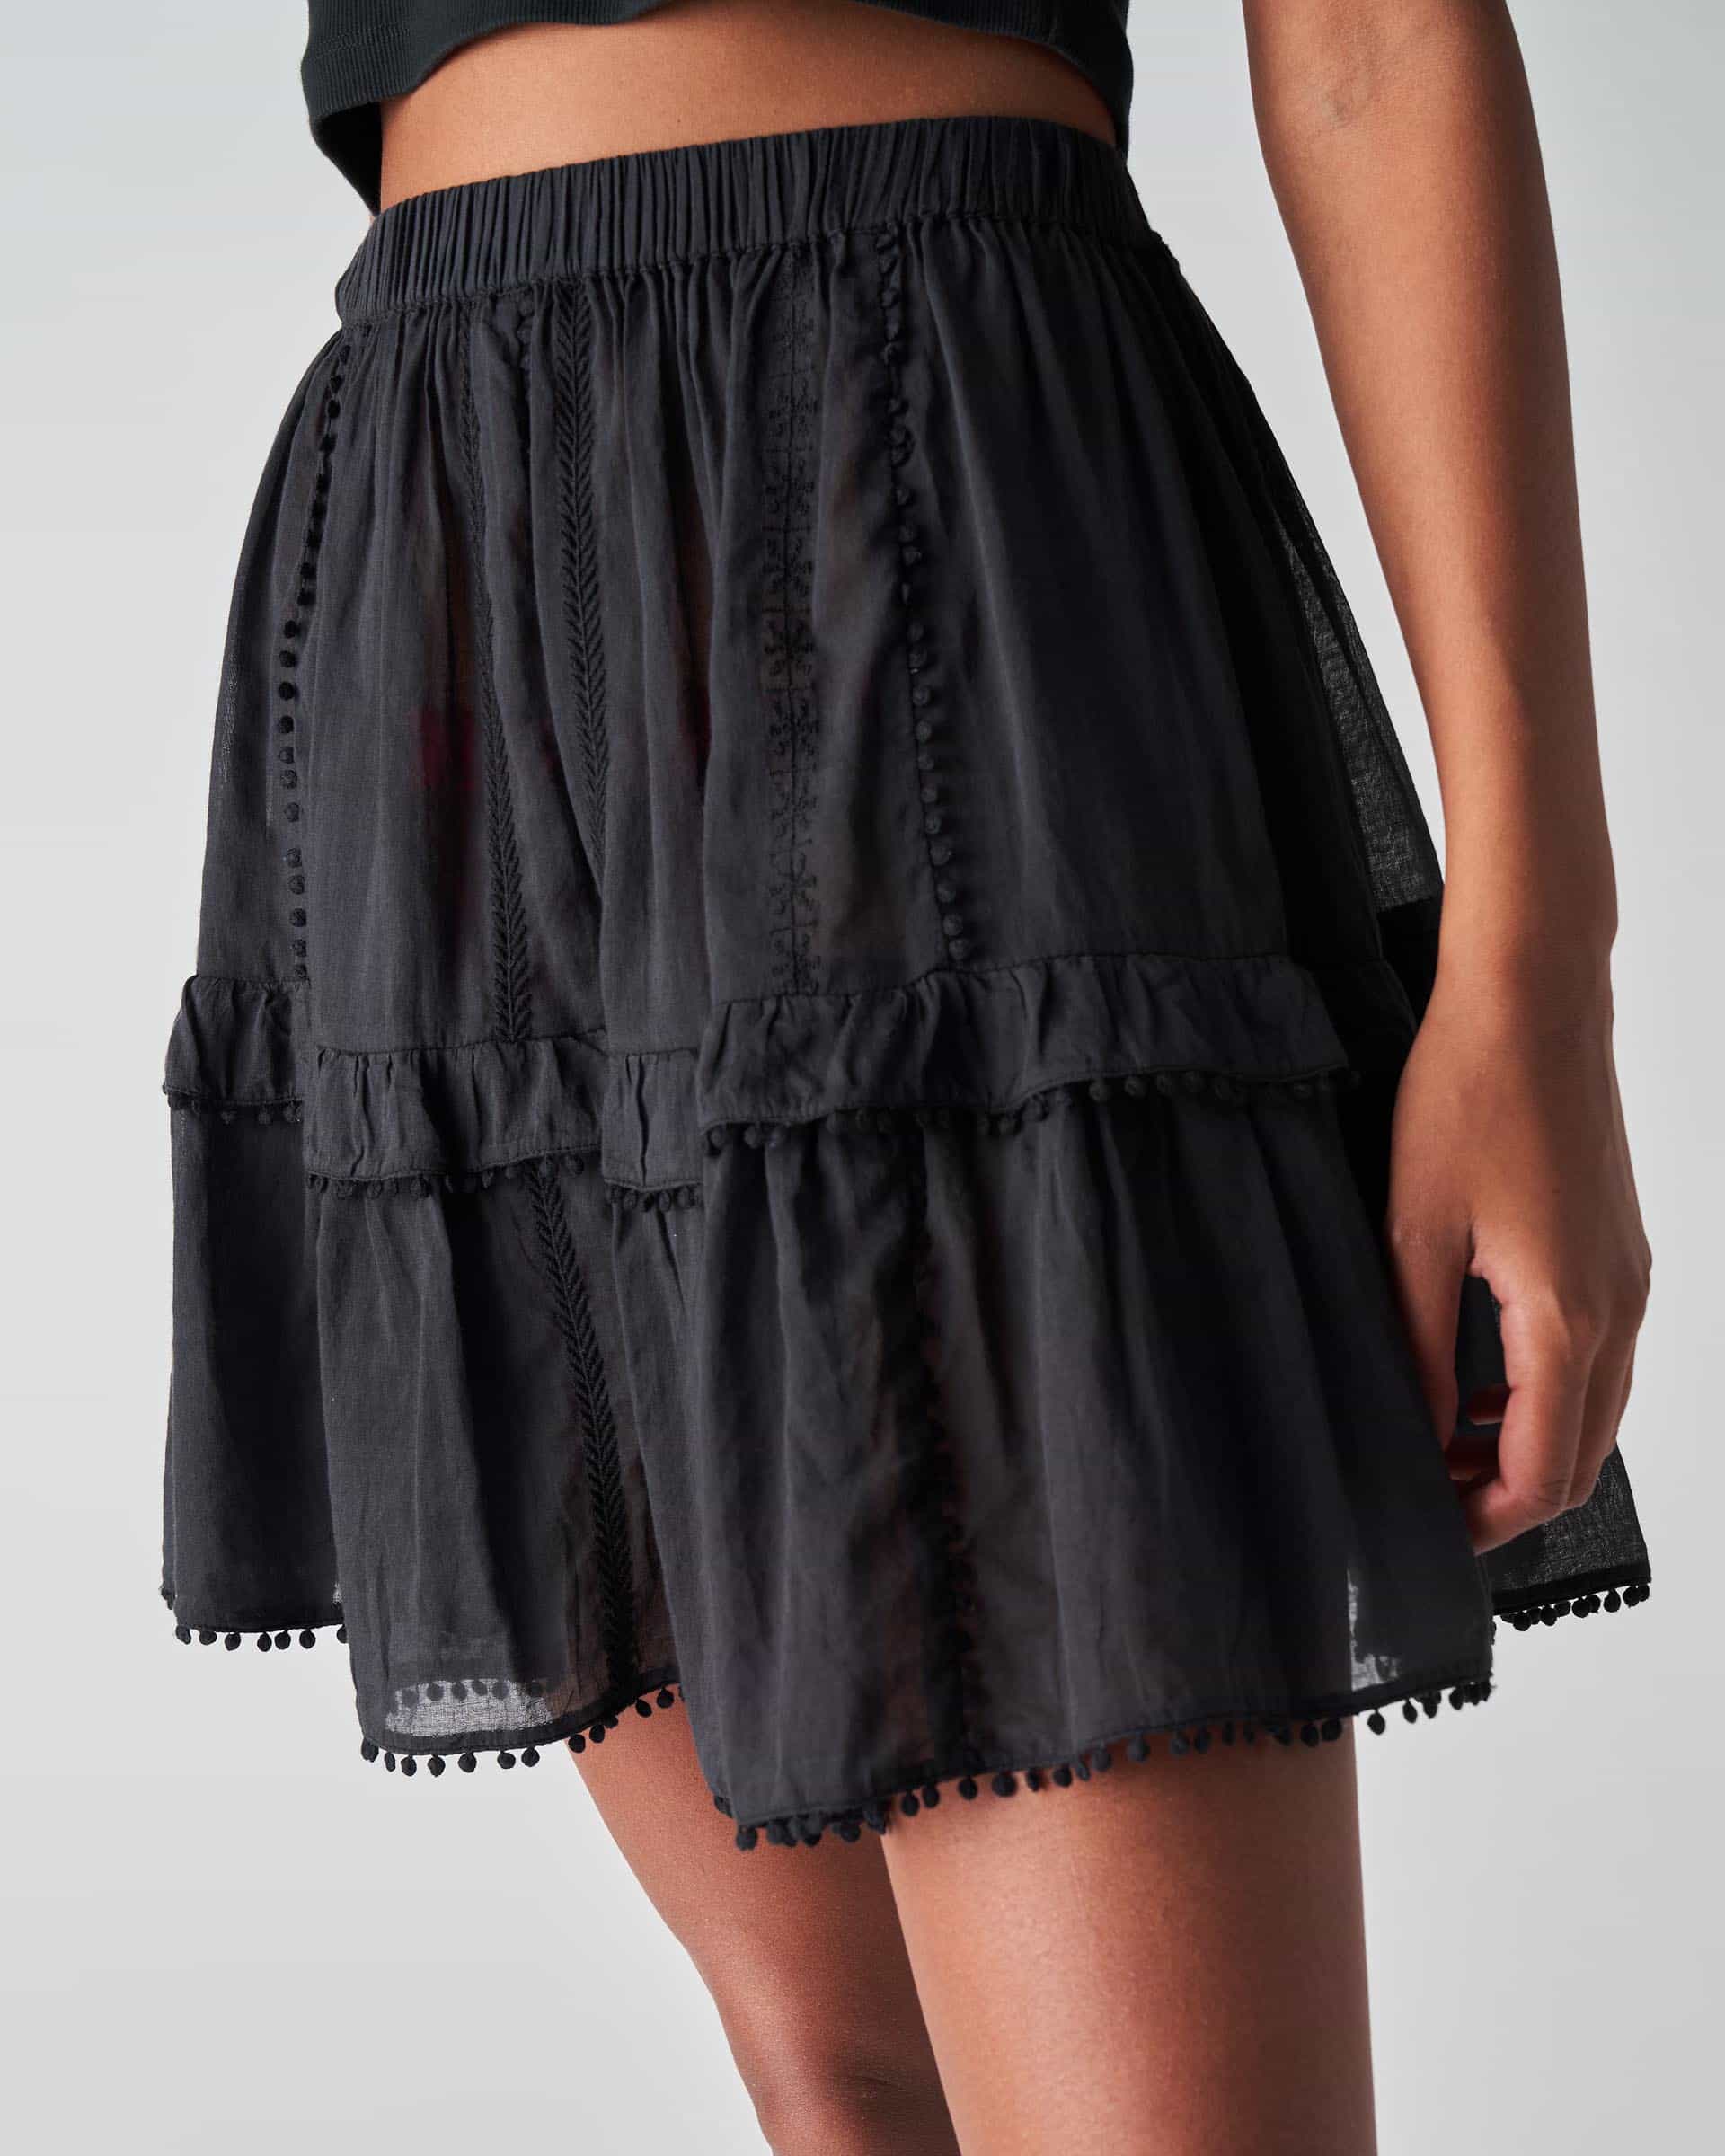 The Market Store | Short Skirt With Flounces And Embroidery